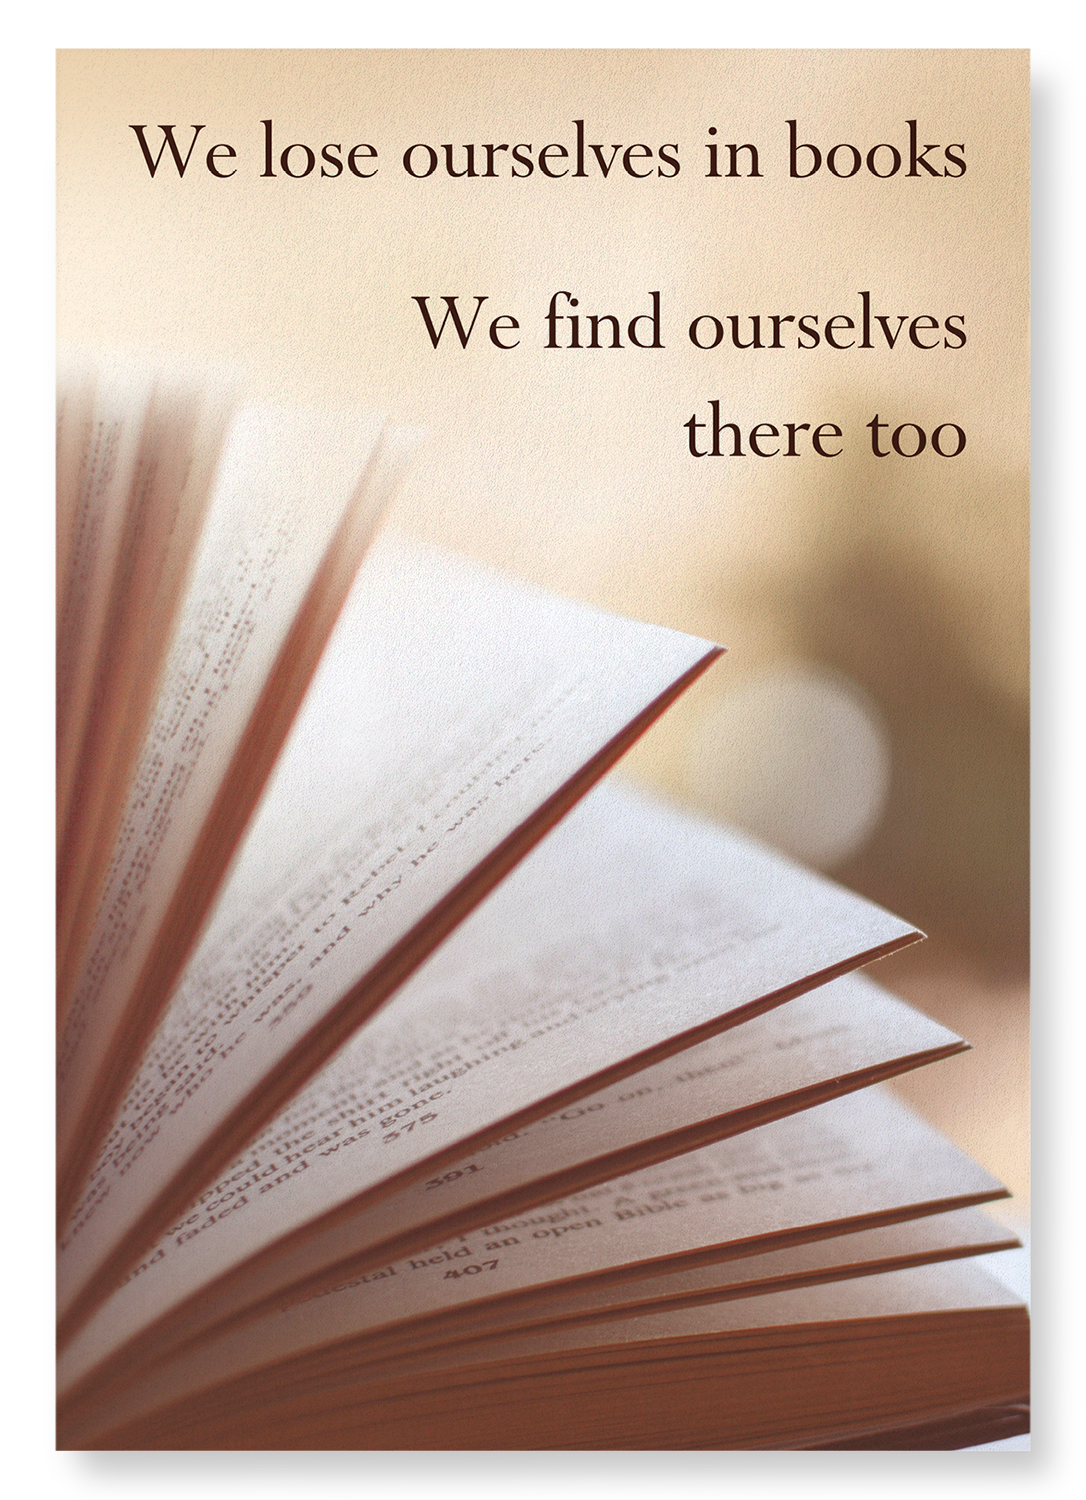 FINDING OURSELVES IN BOOKS